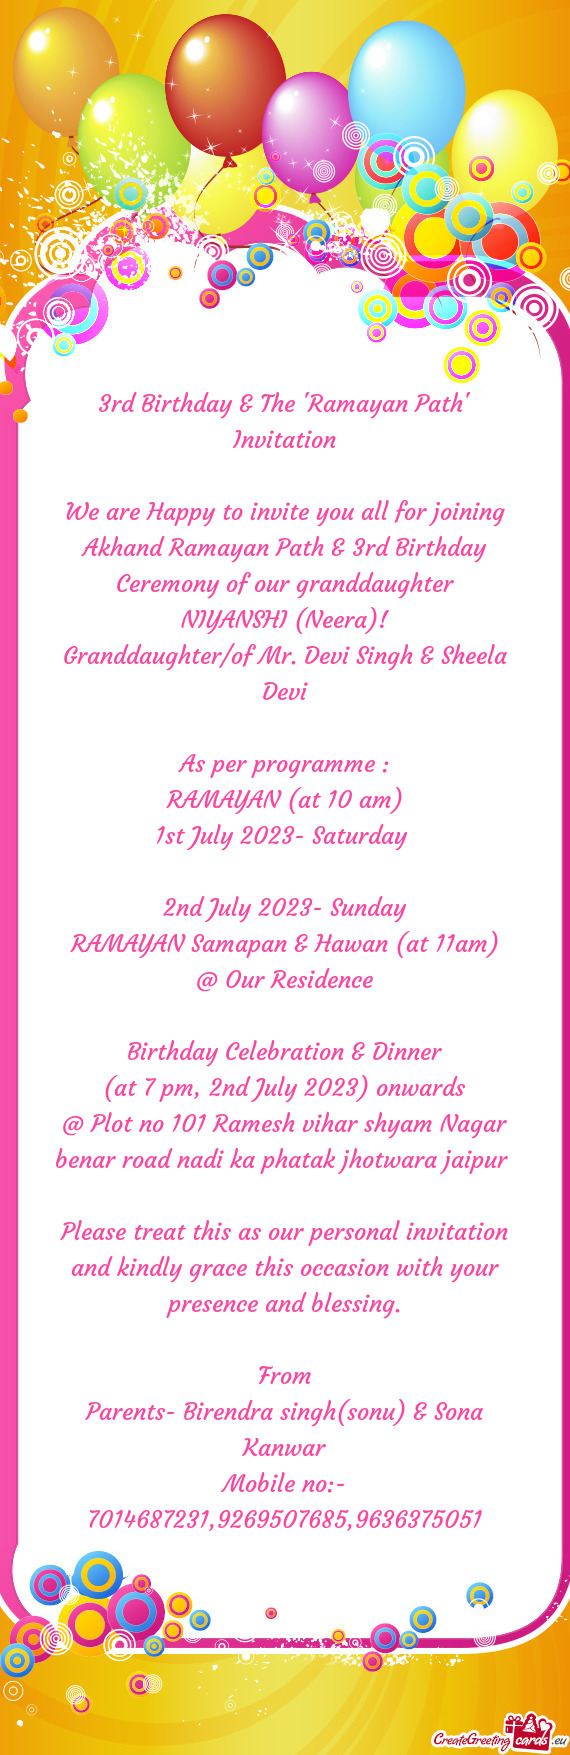 We are Happy to invite you all for joining Akhand Ramayan Path & 3rd Birthday Ceremony of our grandd